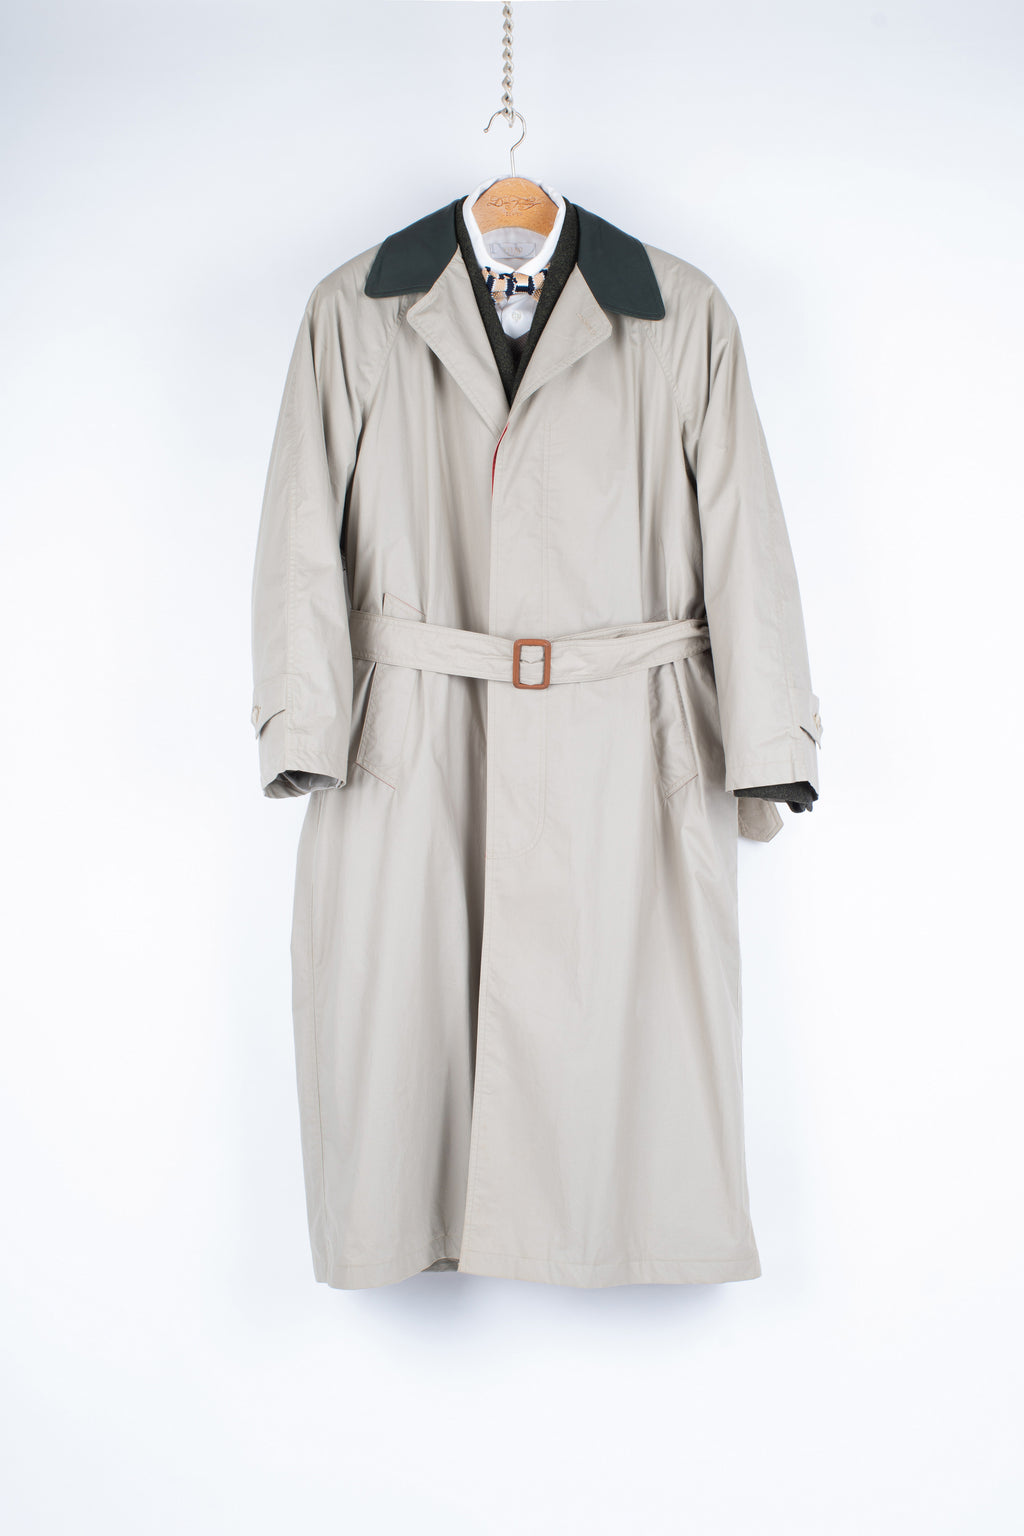 Gant Khaki Brown Oversized Fit Trench Coat with Leather Collar, Size S